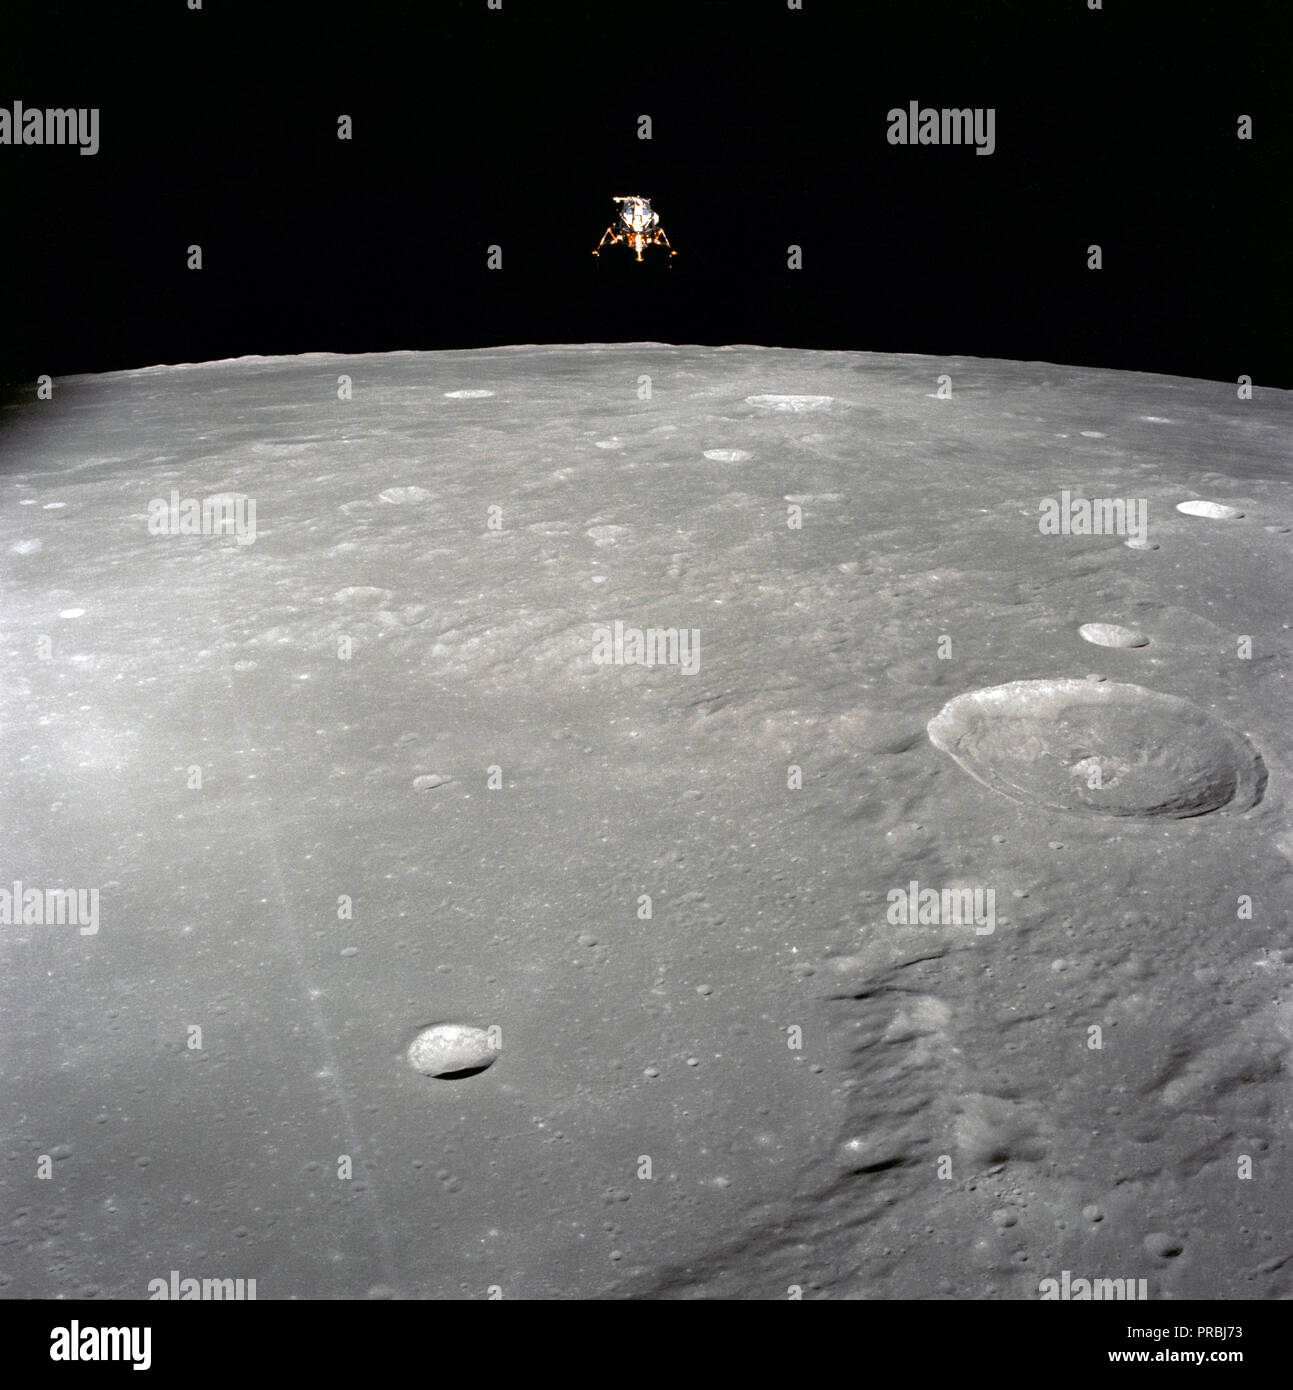 The Apollo 12 Lunar Module (LM), in a lunar landing configuration, is photographed in lunar orbit from the Command and Service Modules (CSM). The coordinates of the center of the lunar surface shown in picture are 4.5 degrees west longitude and 7 degrees south latitude. The largest crater in the foreground is Ptolemaeus; and the second largest is Herschel. Aboard the LM were astronauts Charles Conrad Jr., commander; and Alan L. Bean, lunar module pilot. Astronaut Richard R. Gordon Jr., command module pilot, remained with the CSM in lunar orbit while Conrad and Bean descended in the LM to explo Stock Photo